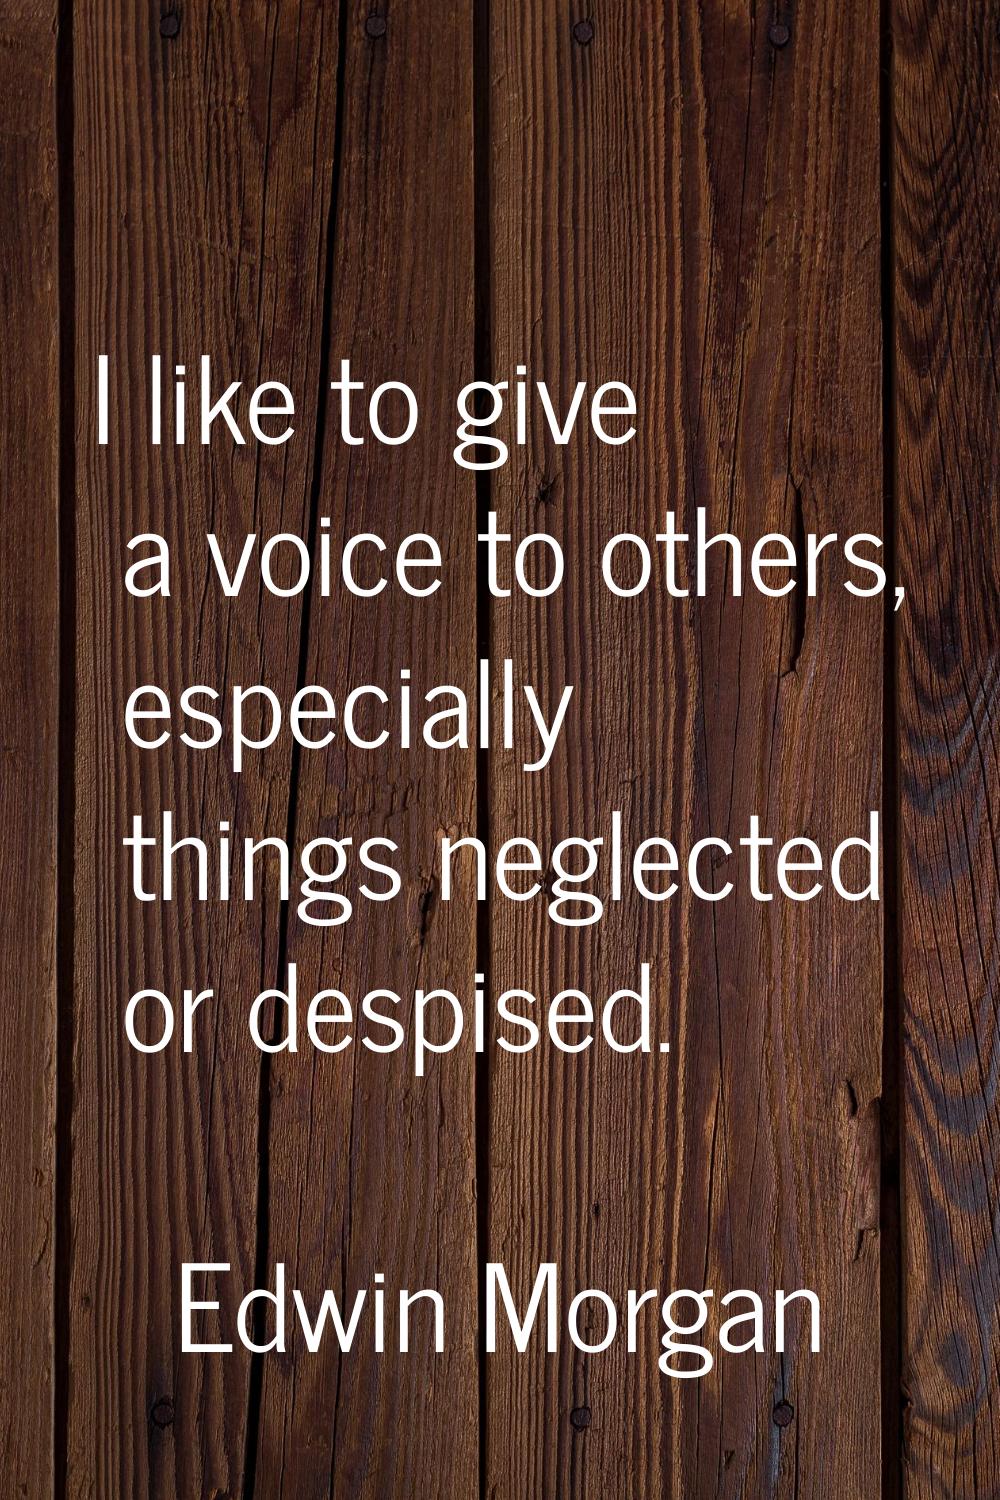 I like to give a voice to others, especially things neglected or despised.